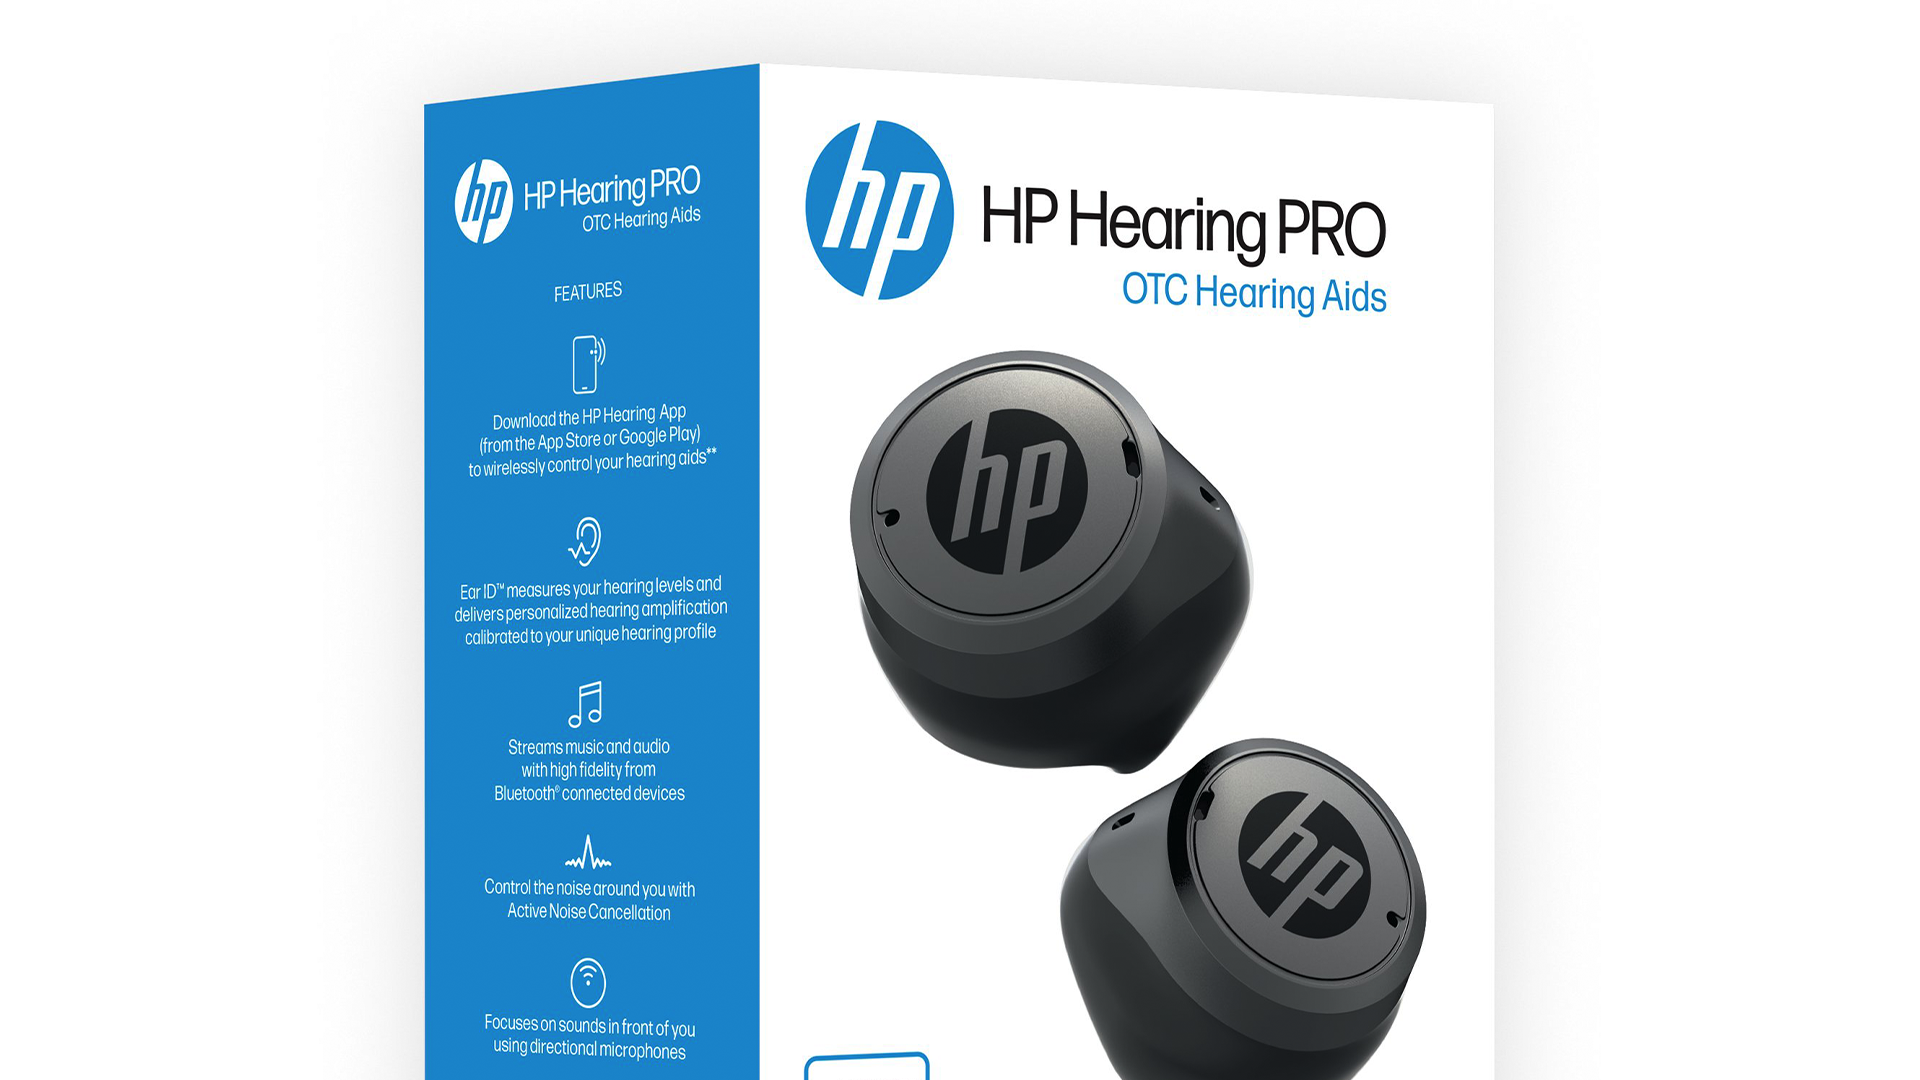 HP and Nuheara Team Up to Launch Affordable OTC Hearing Aids